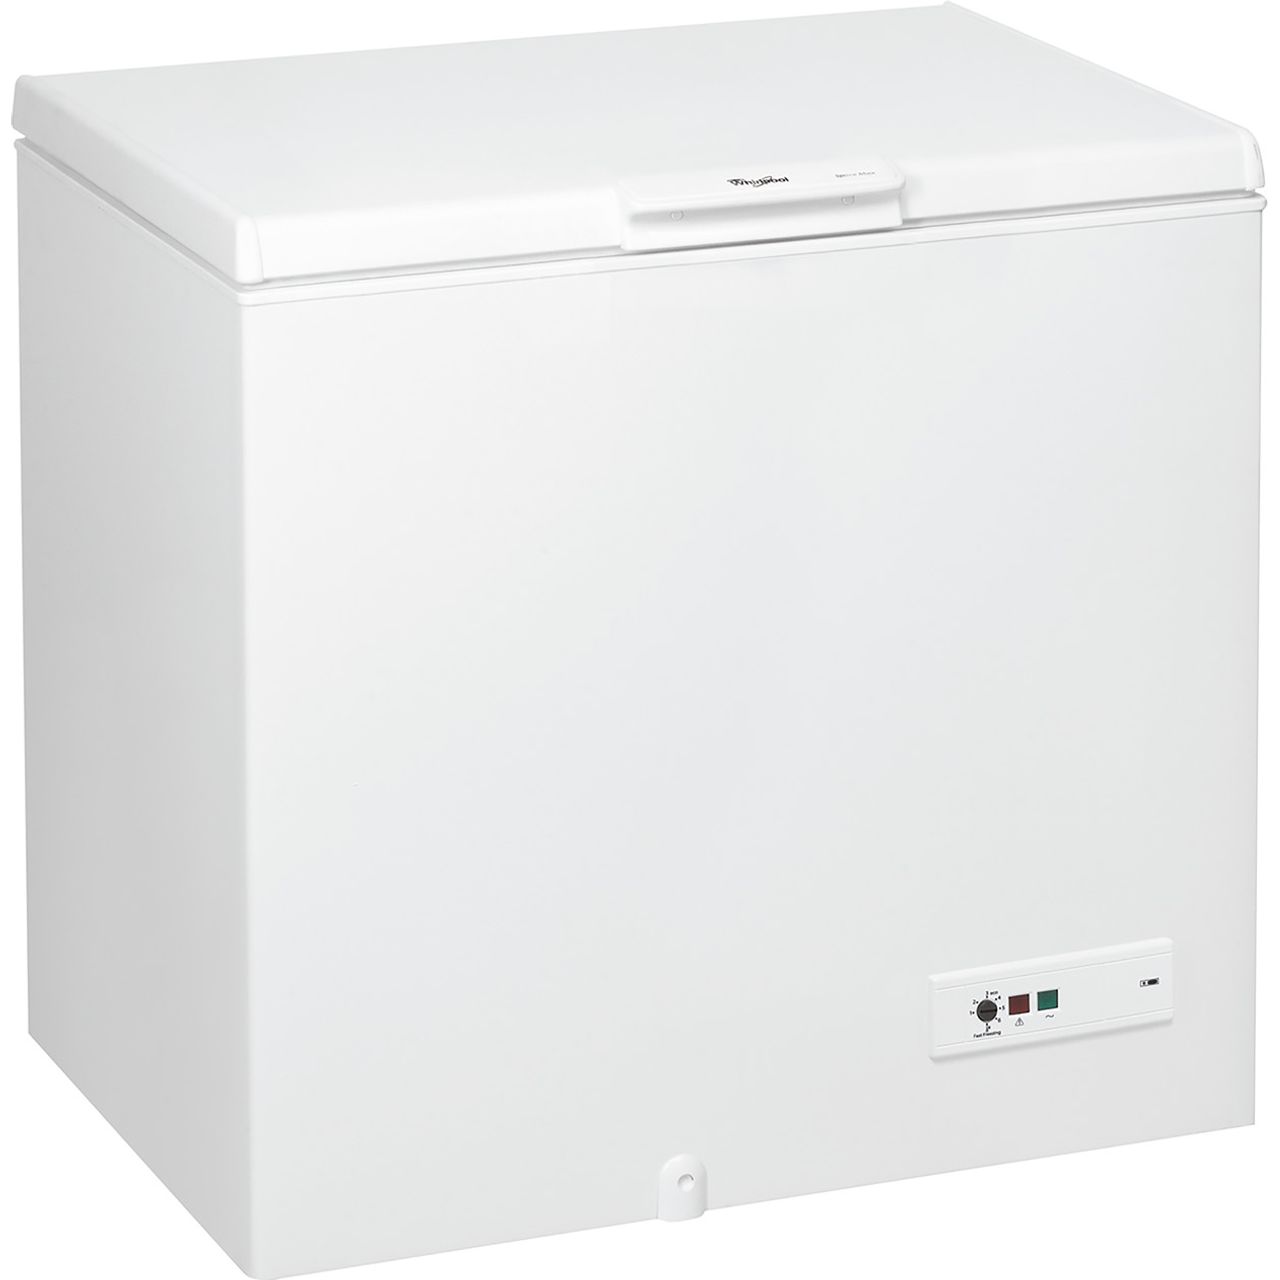 Whirlpool WHM31111 Chest Freezer Review